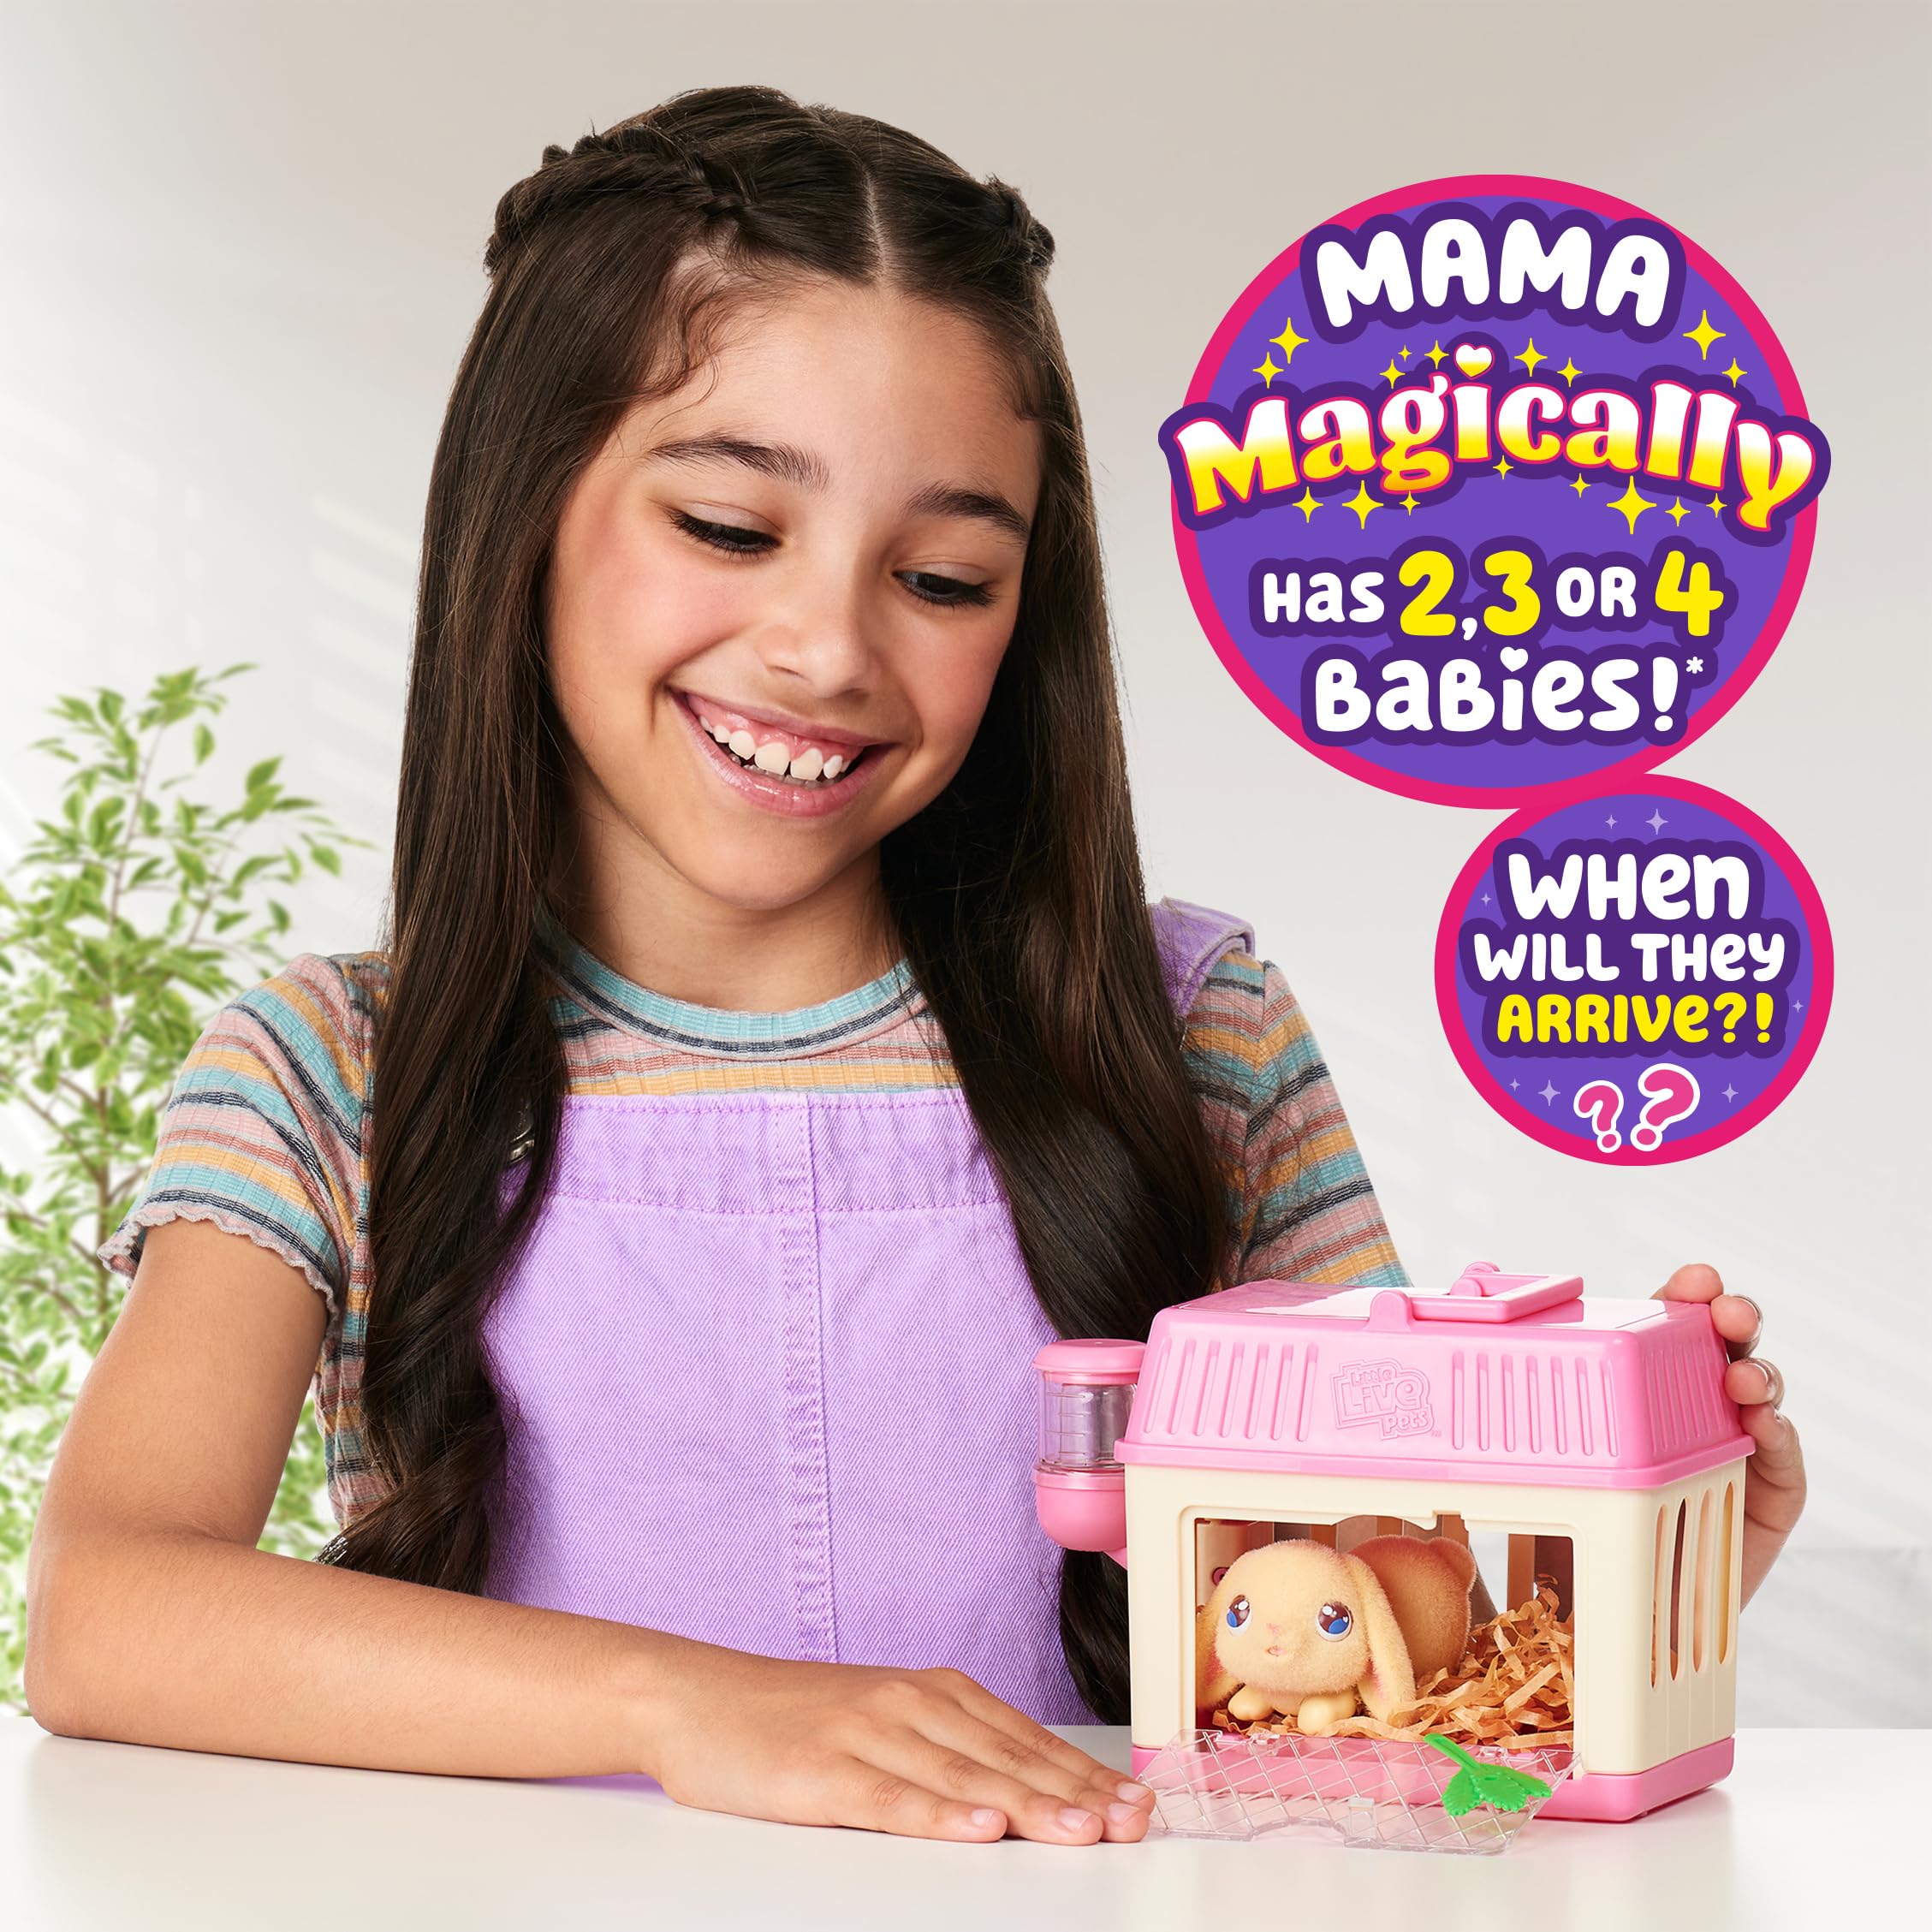 Little Live Pets - Mama Surprise Minis. Feed and Nurture a Lil' Bunny Inside Their Hutch so she can be a Mama. She has 2, 3, or 4 Babies with Surprise Accessories to Dress Up The Babies